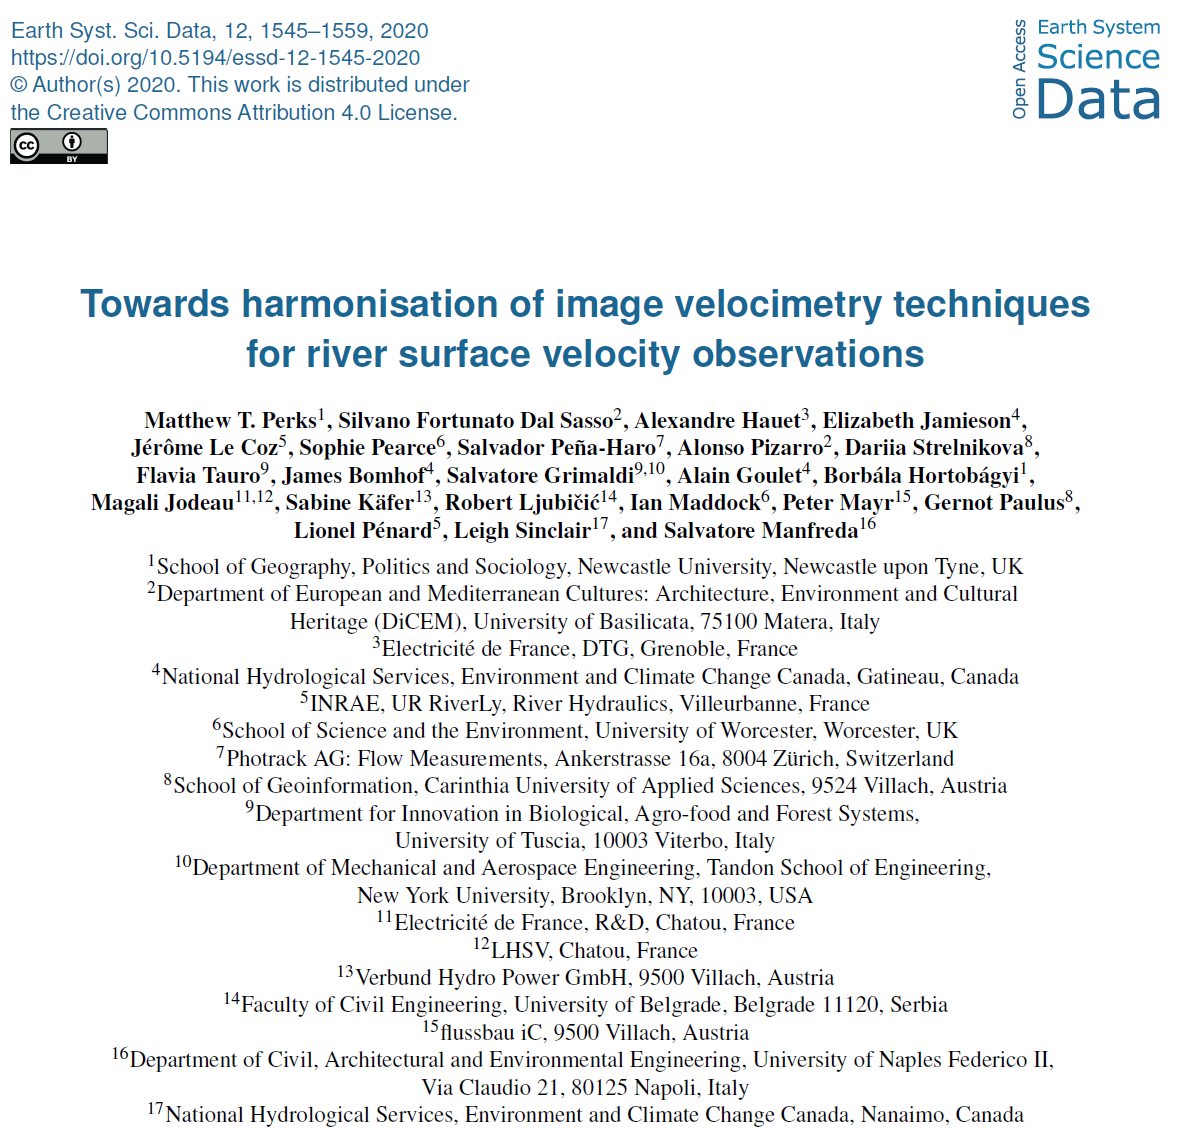 Towards harmonisation of image velocimetry techniques for river surface velocity observations